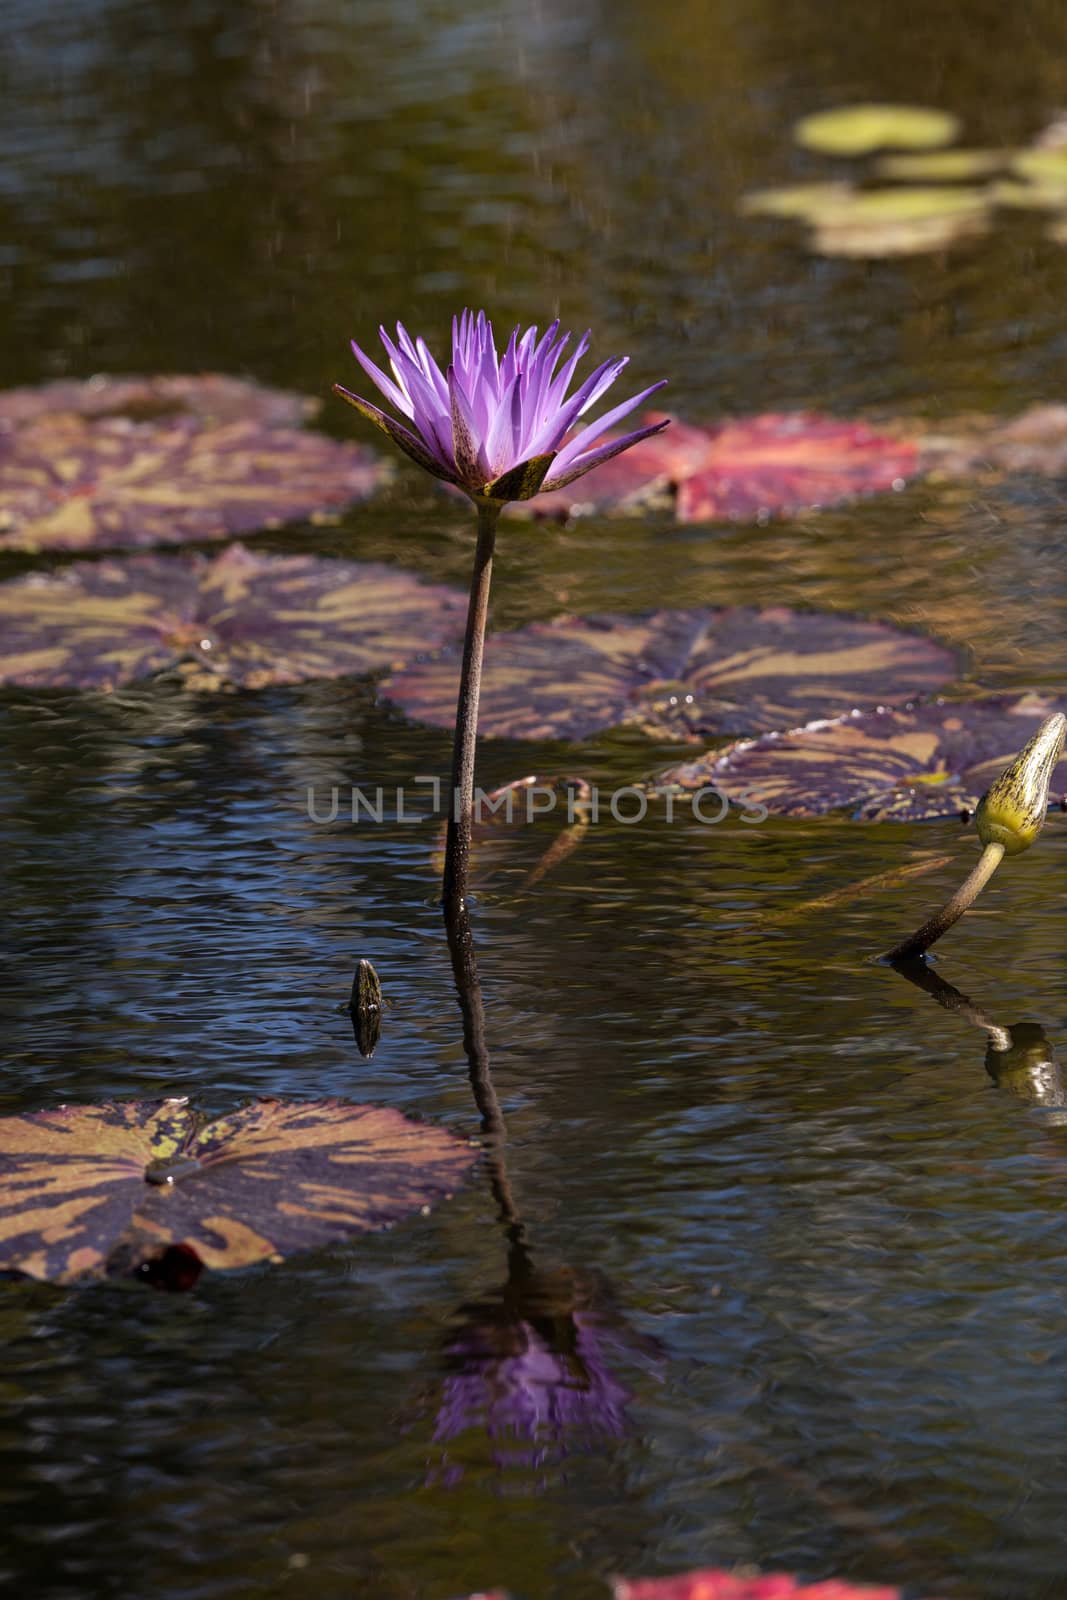 Blue Star Water lily Nymphaea nouchali blossoms among lily pads on a pond in Naples, Florida